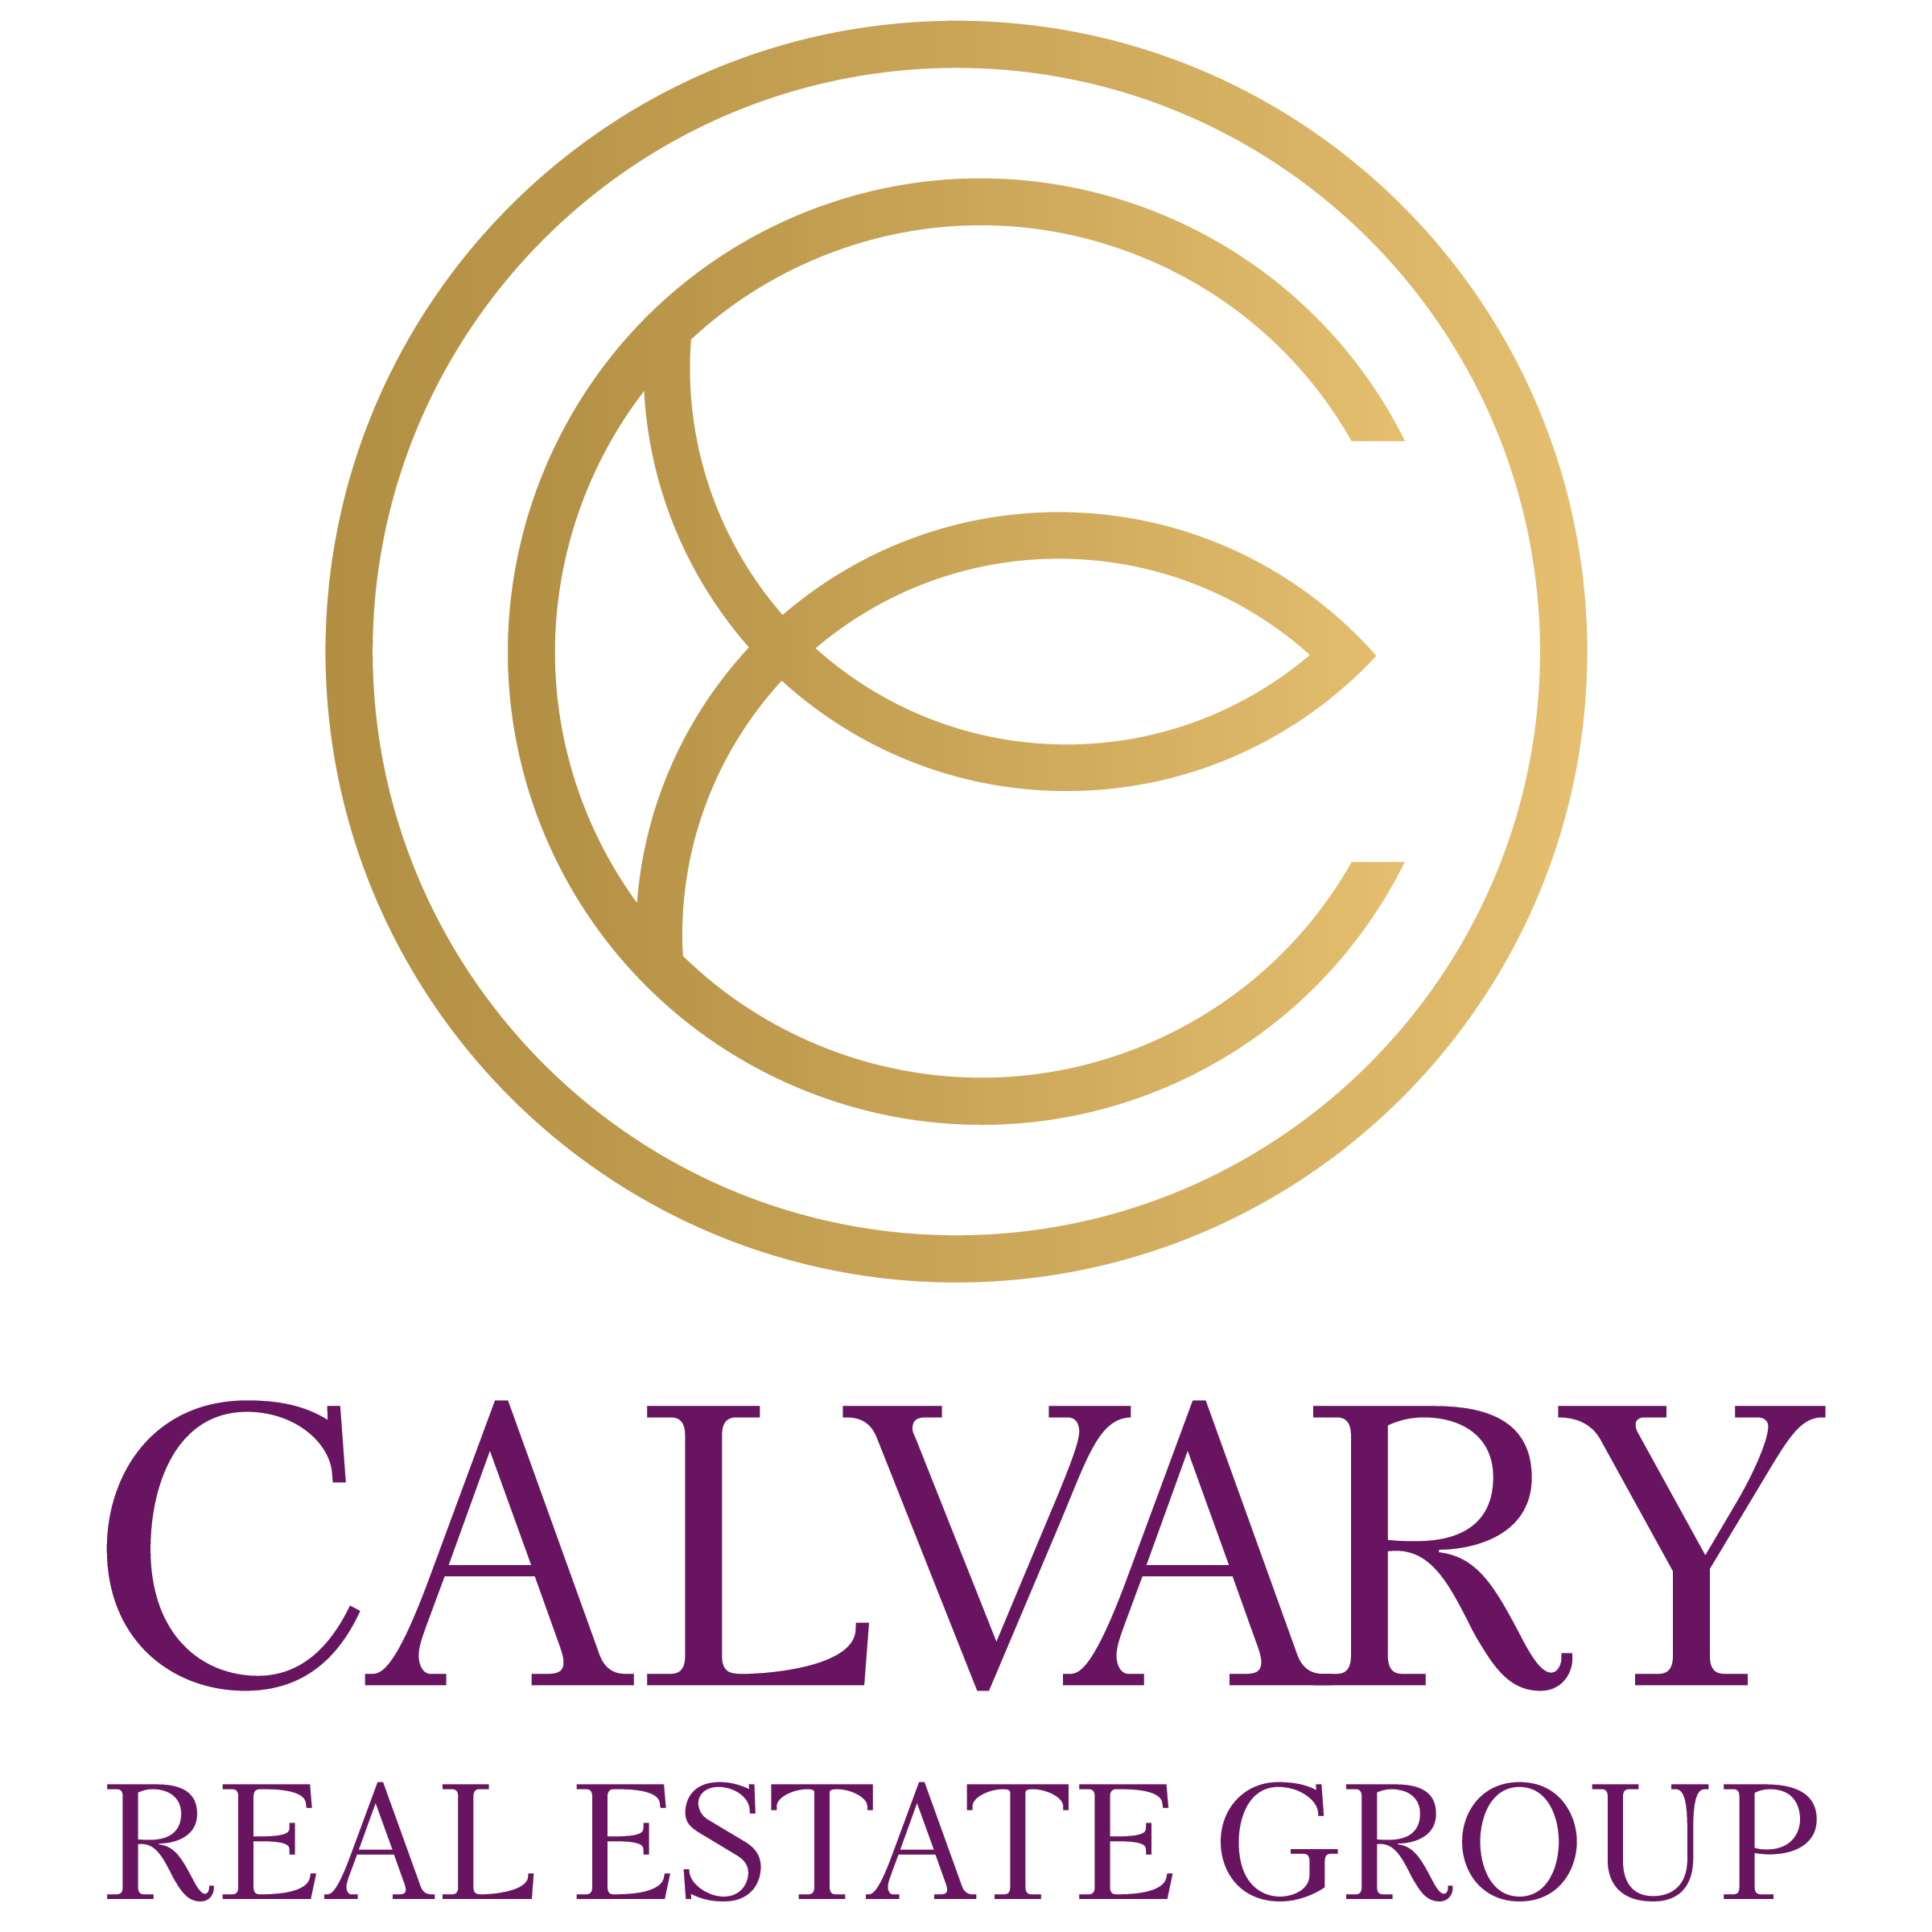 Calvary Real Estate Group